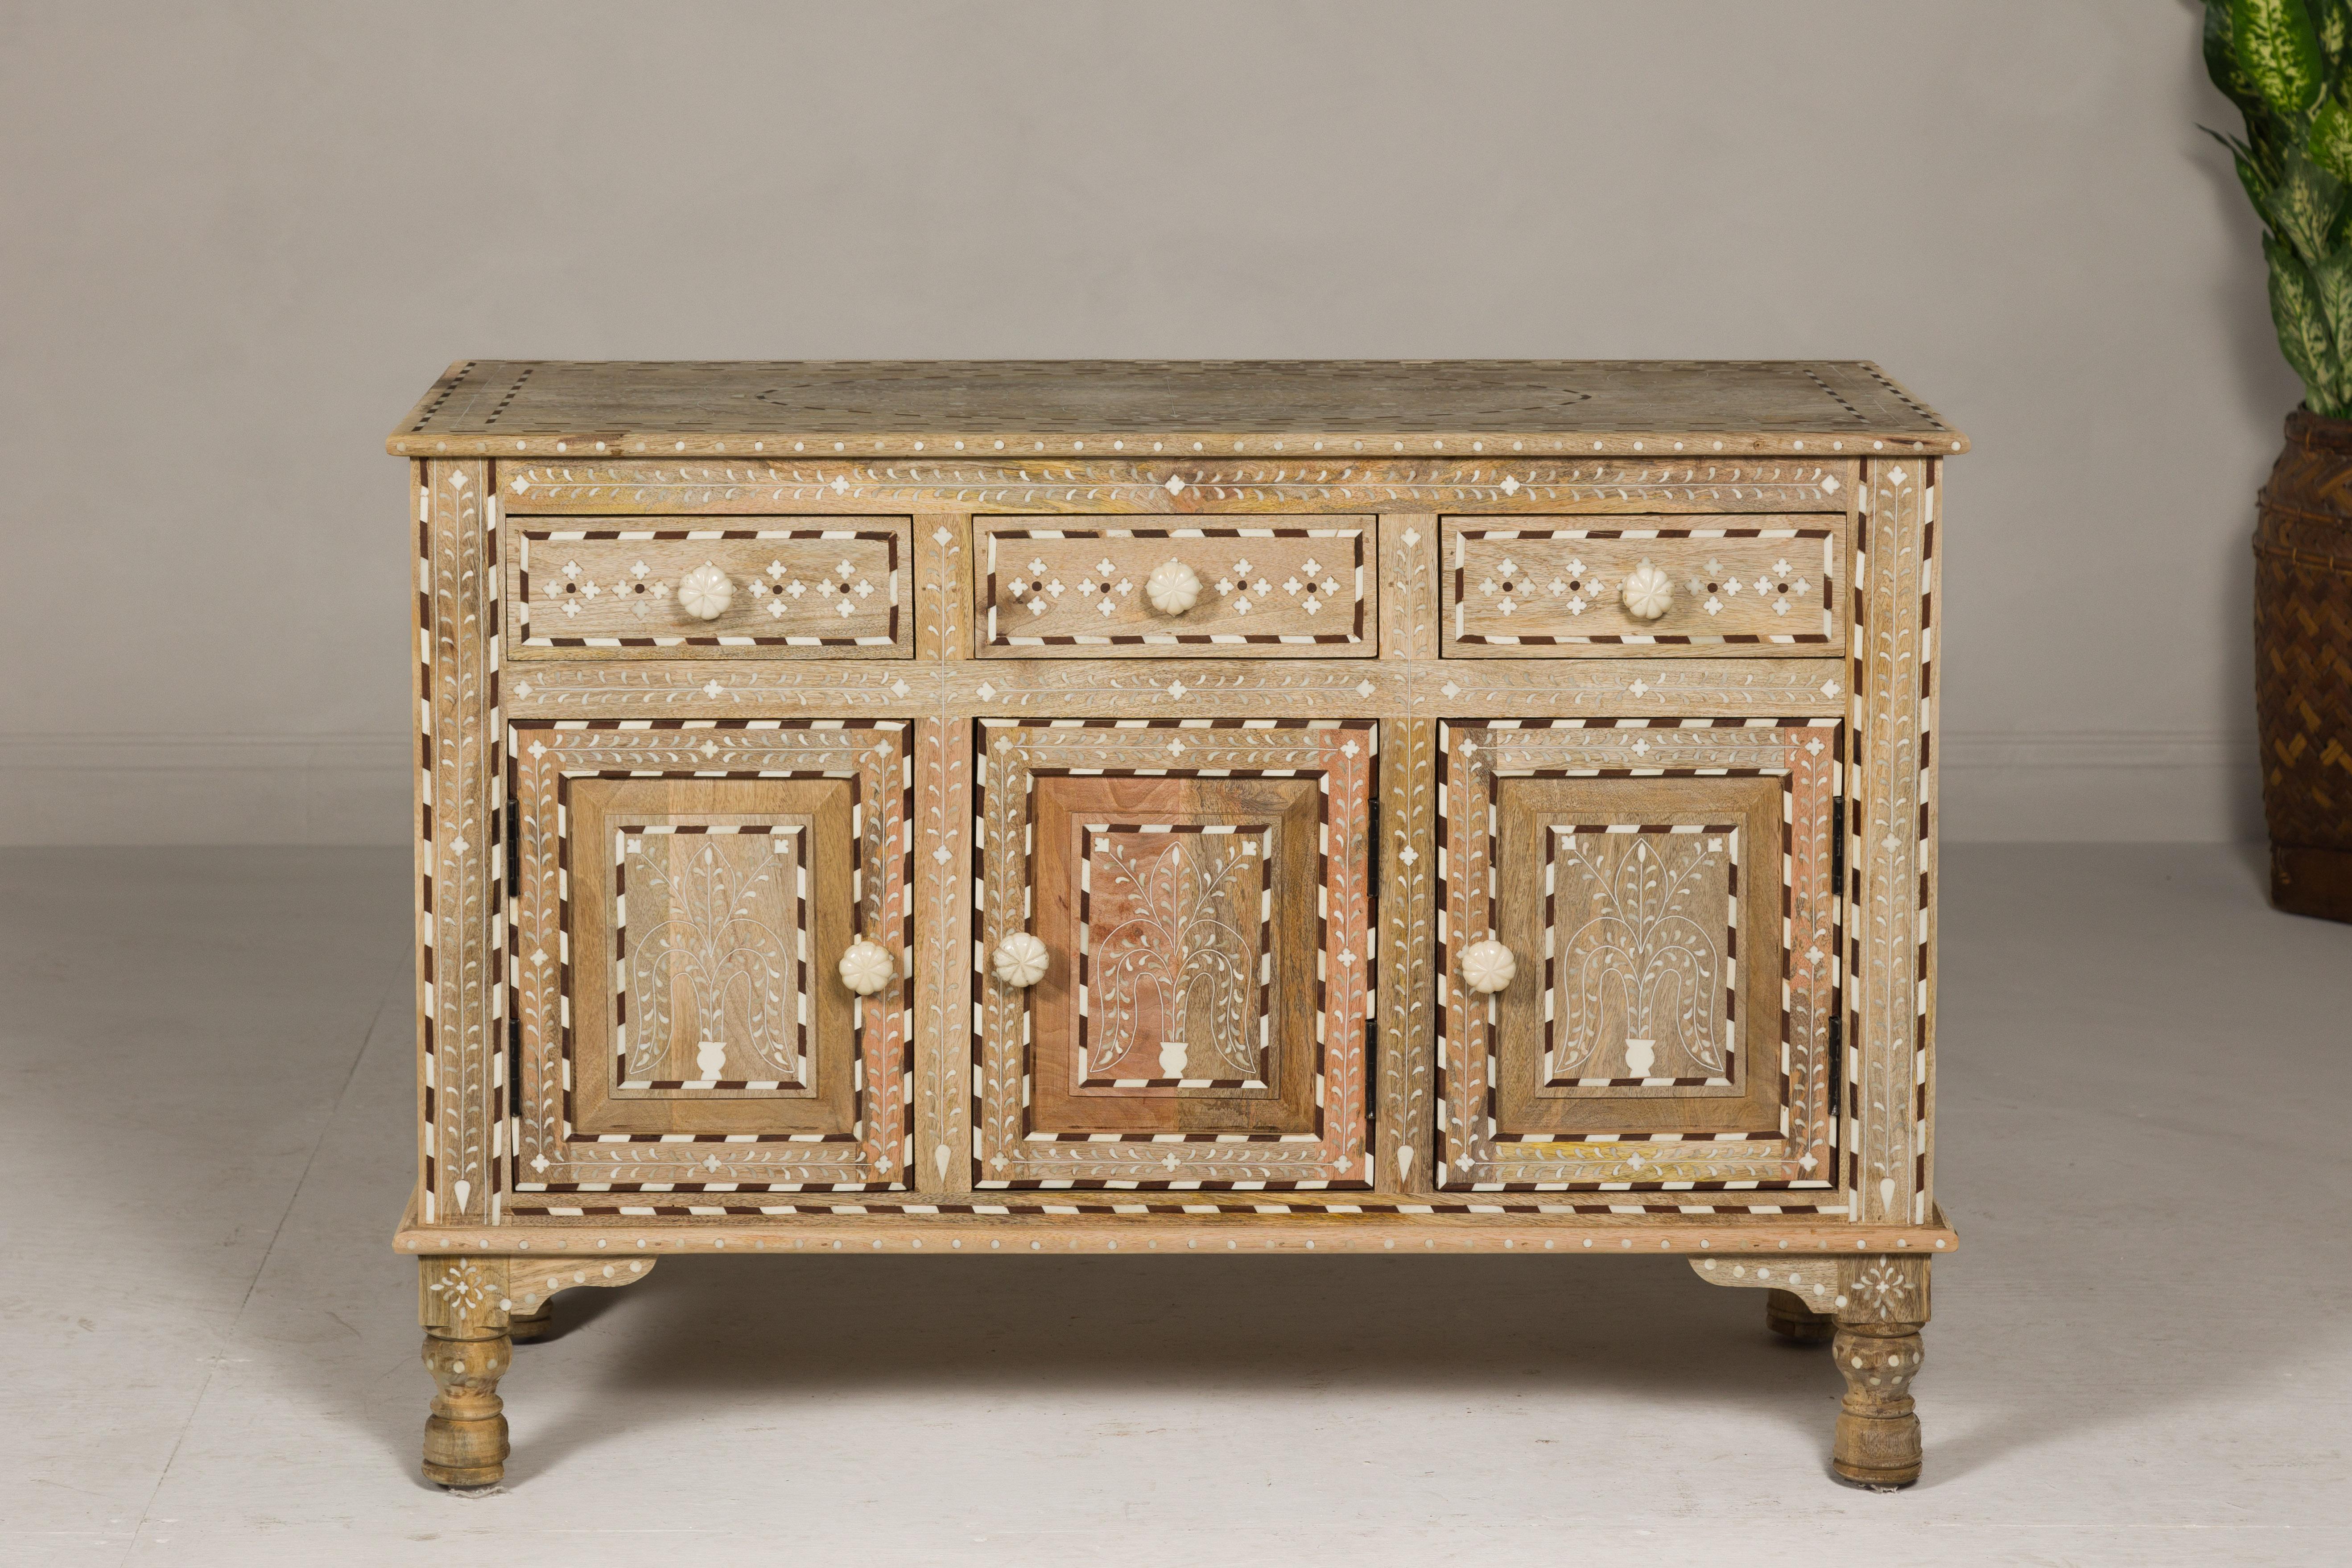 Anglo-Indian style richly inlaid mango wood buffet with three drawers over three doors. Reflecting the opulent heritage of Anglo-Indian style design, this buffet is an emblem of masterful craftsmanship and artistry. Meticulously inlaid with bone,